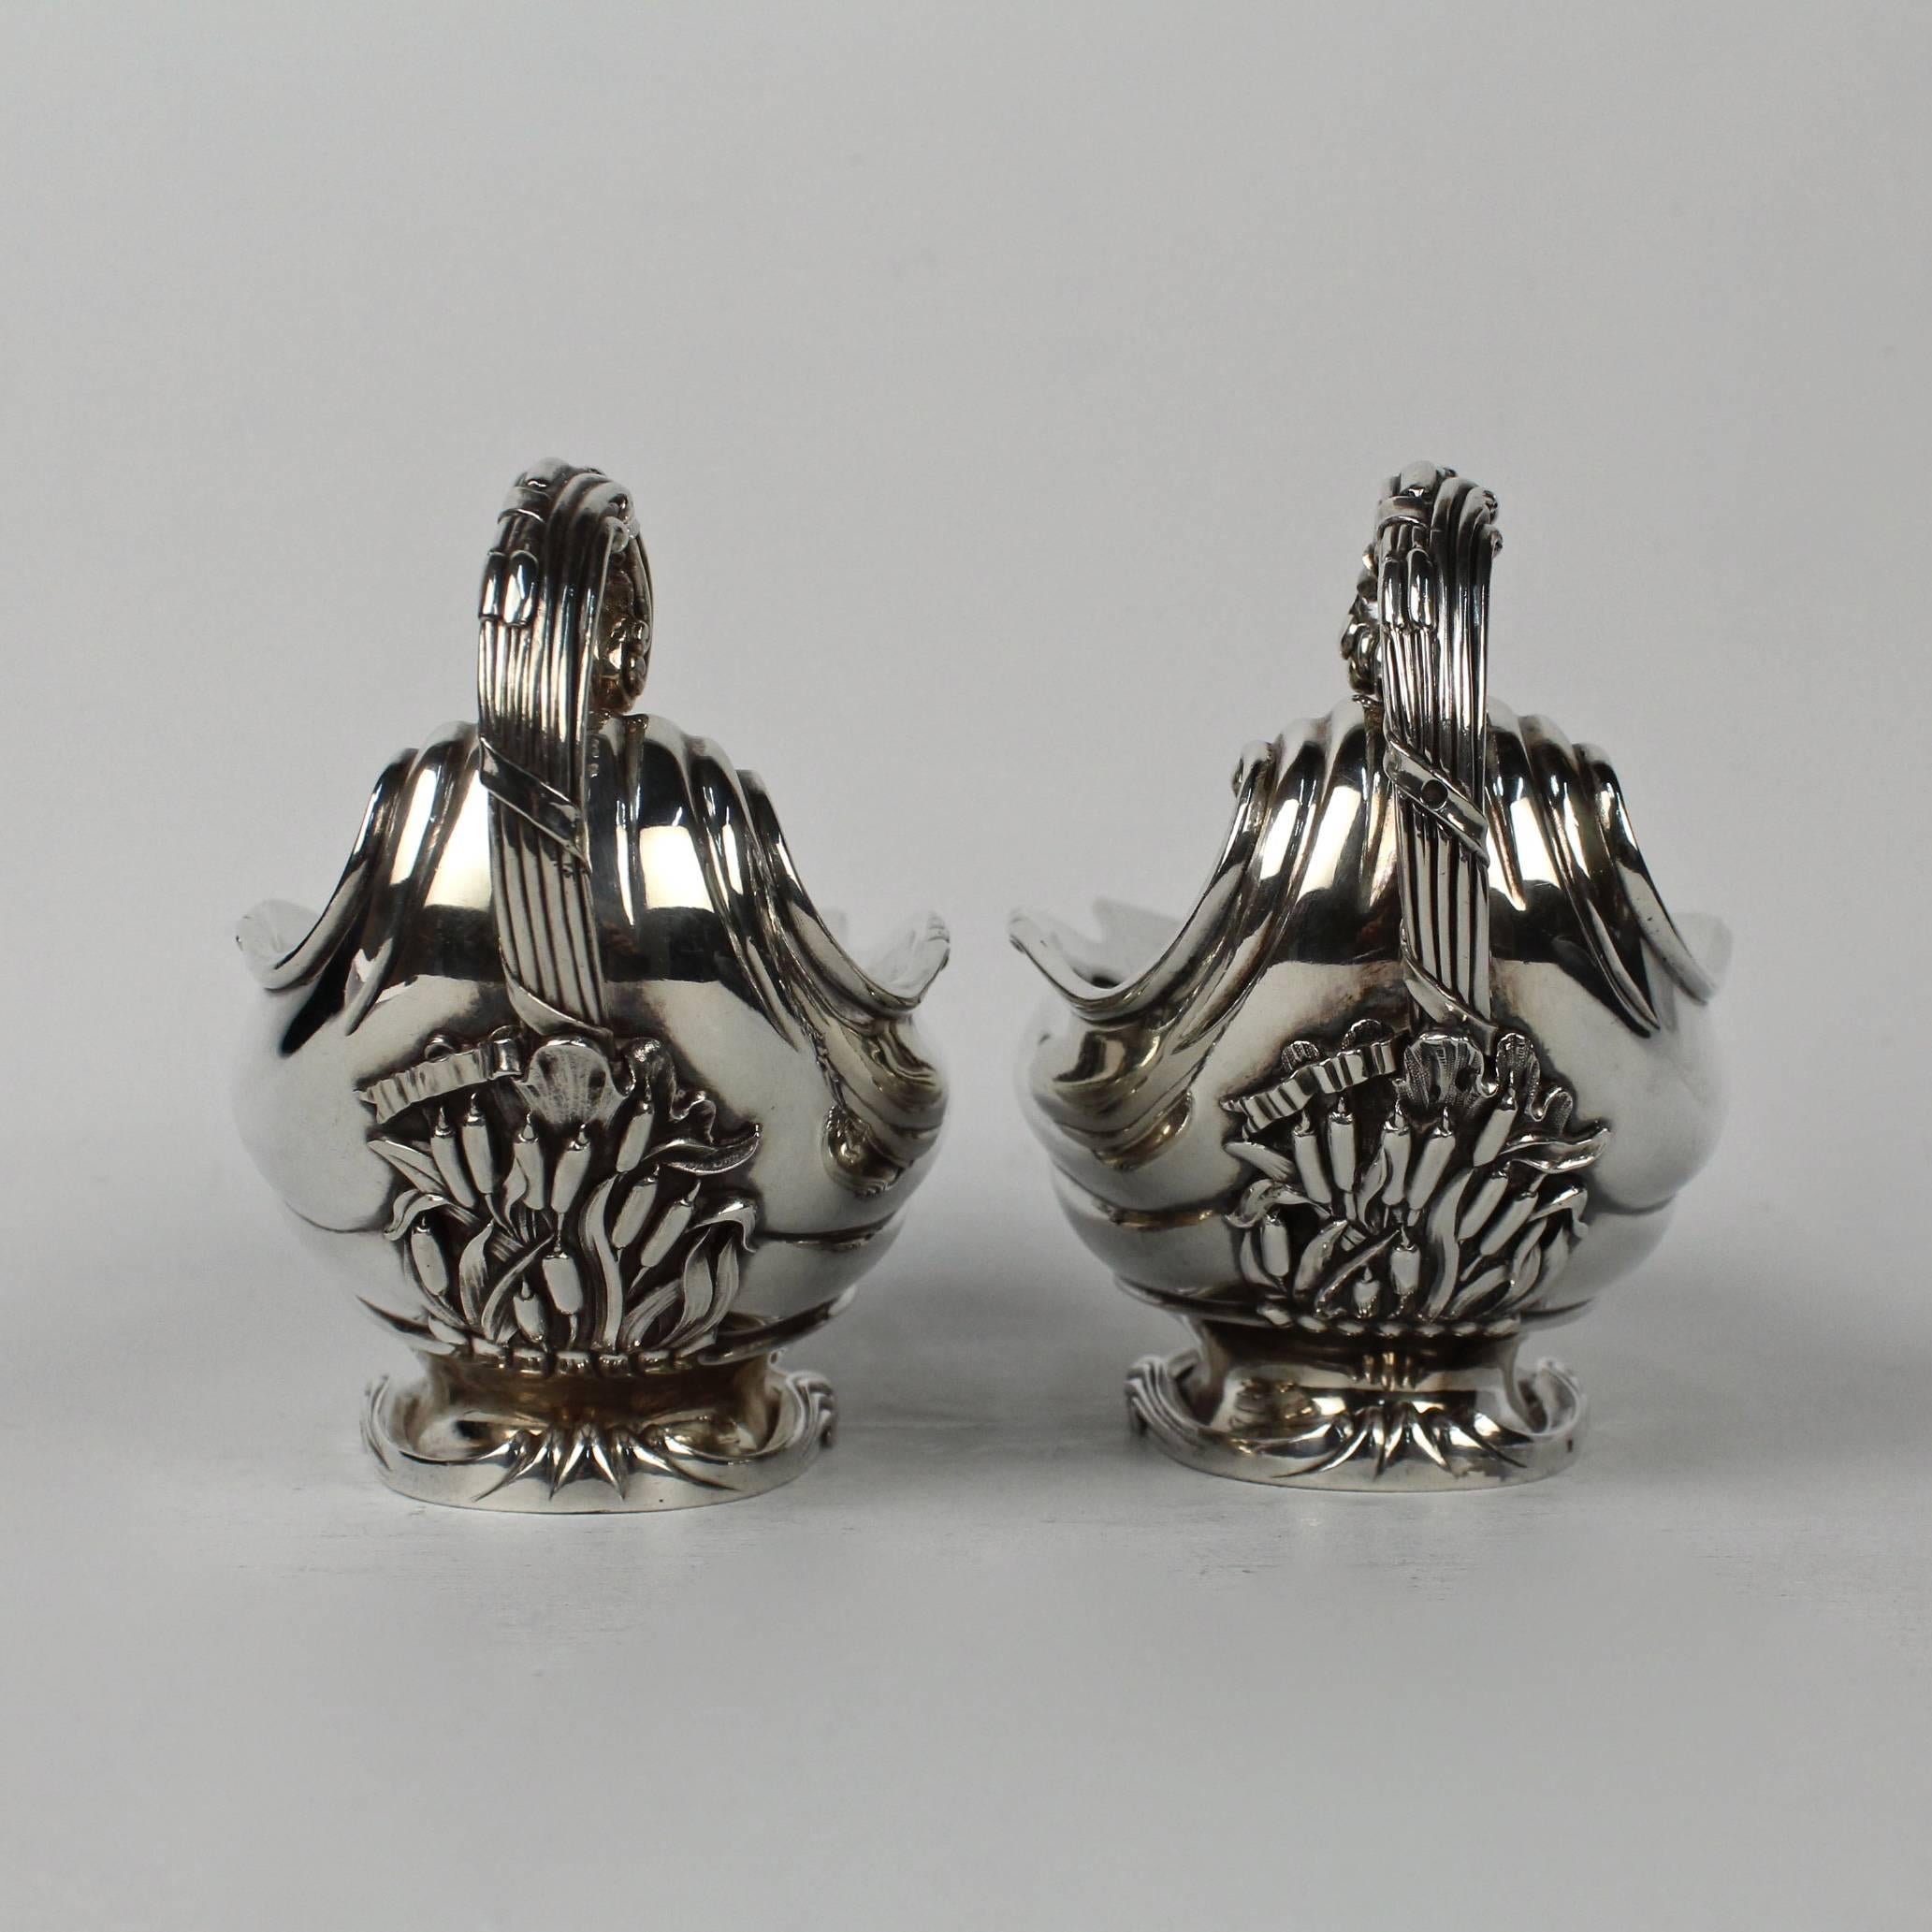 Pair of Art Nouveau Dutch Sterling Silver Sauce Boats with Cattails by Ph Saakes In Good Condition For Sale In Philadelphia, PA